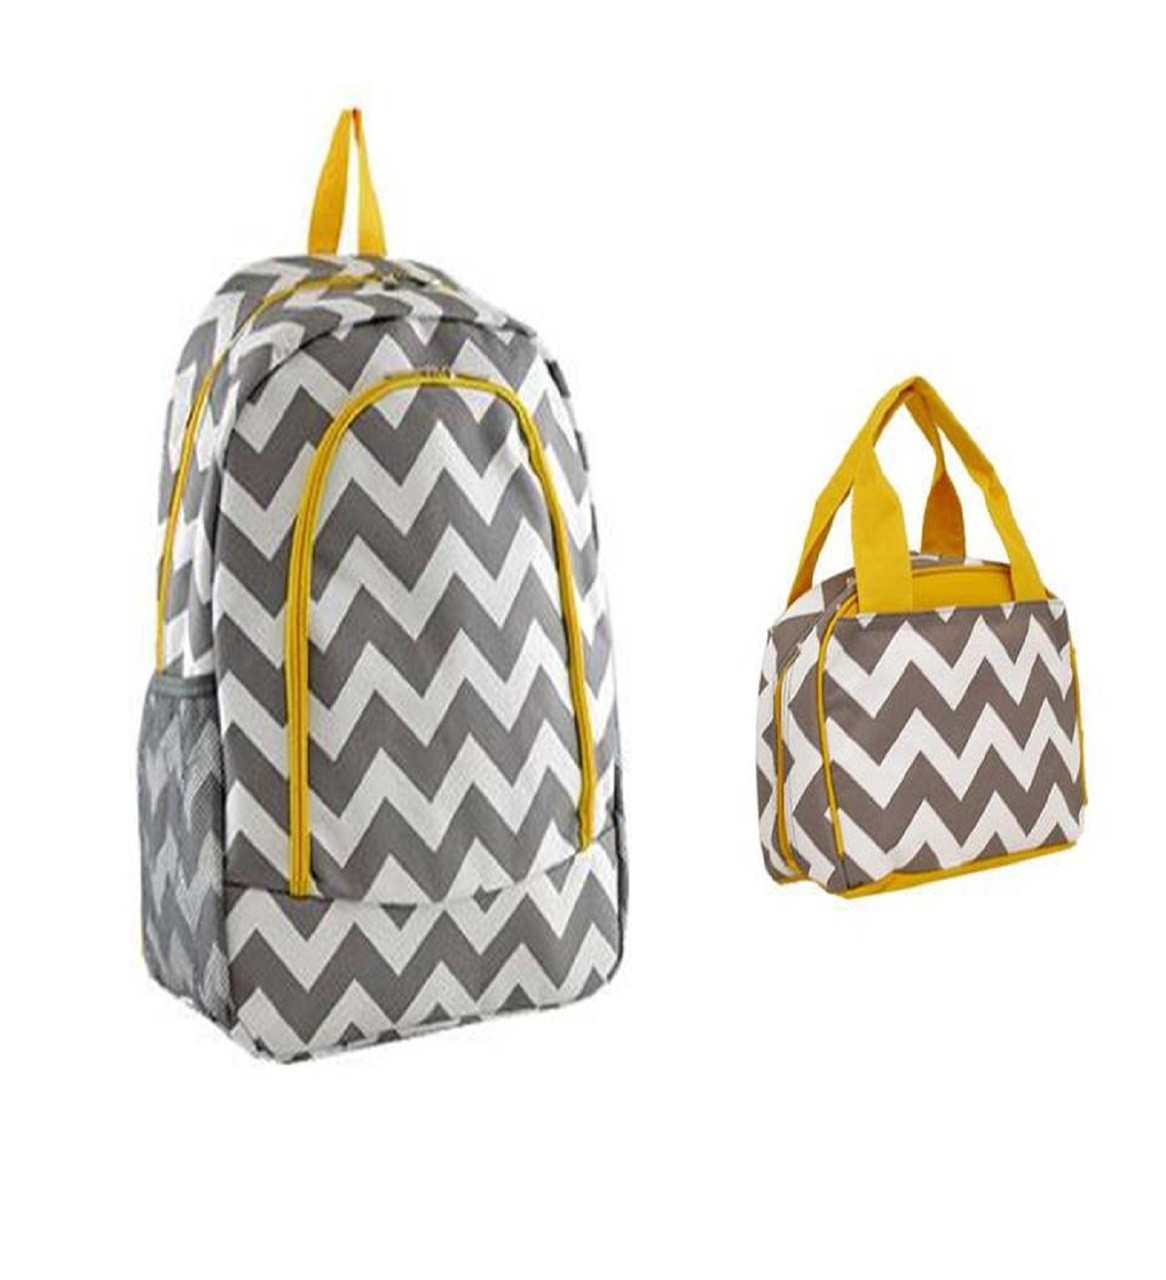 Grey and Yellow Chevron Backpack W Matching Lunch Bag - Handbags, Bling &  More!